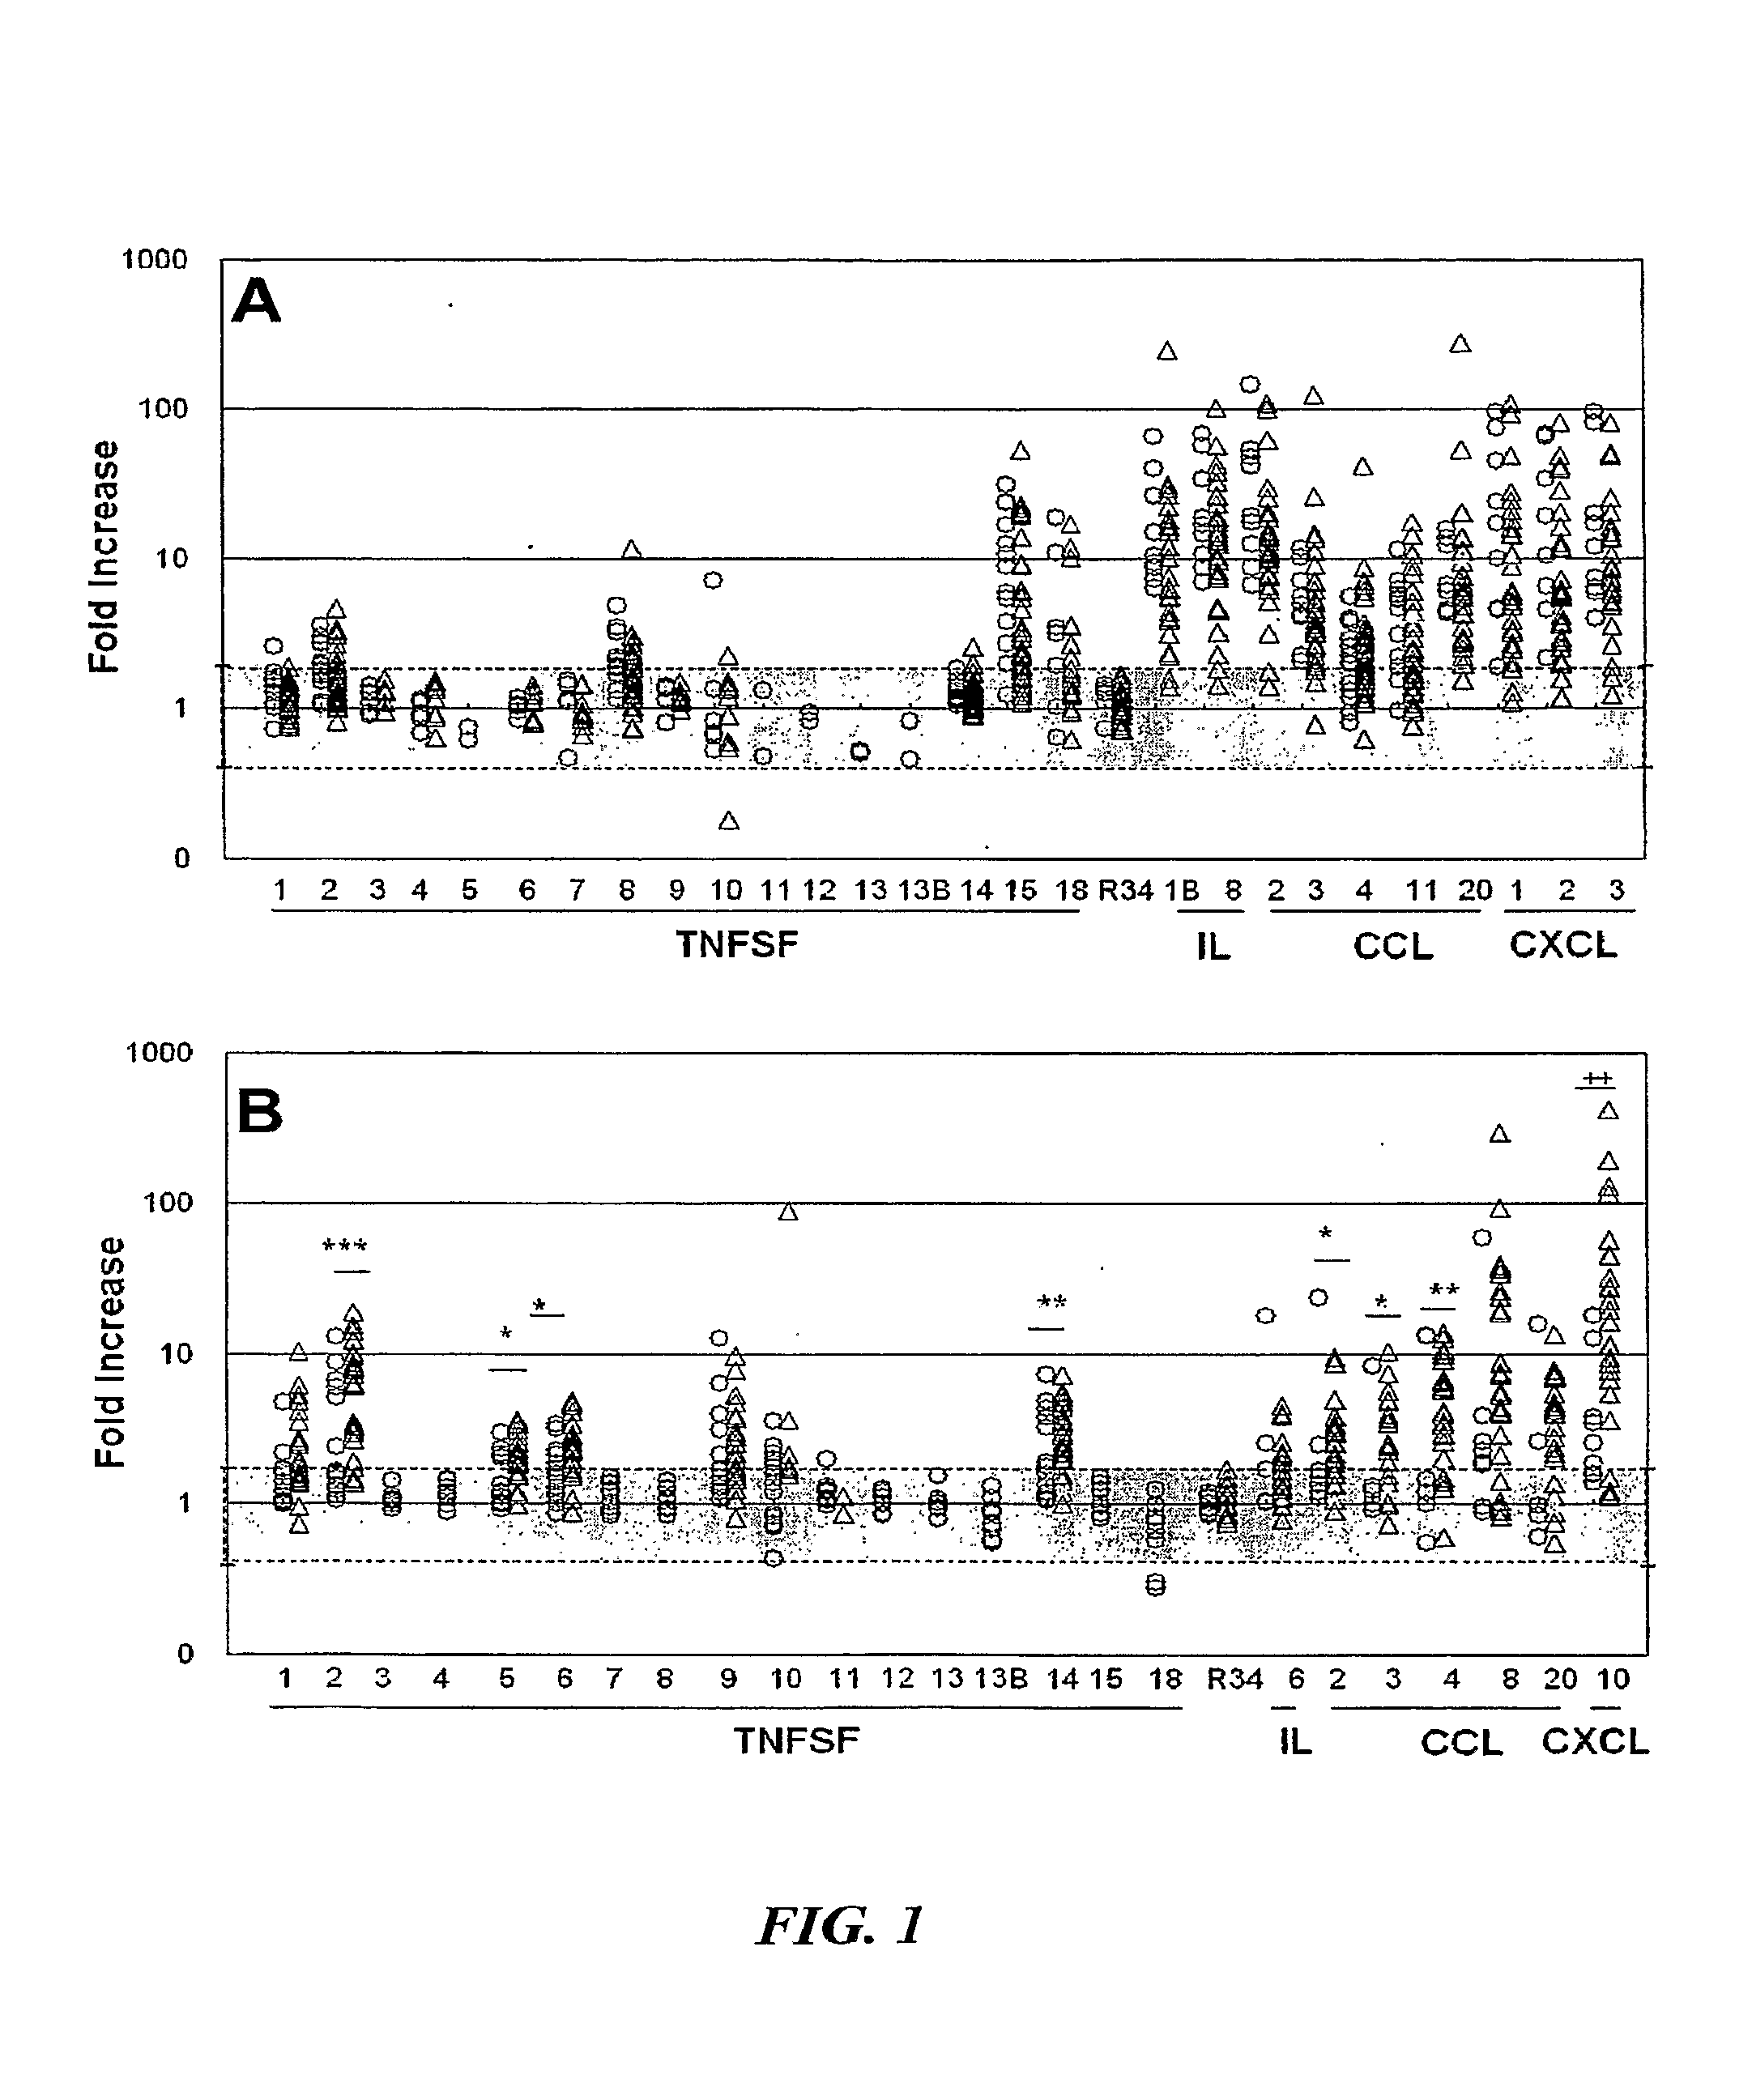 Methods regarding enhanced T-cell receptor-mediated tumor necrosis factor superfamily mRNA expression in peripheral blood leukocytes in patients with crohn's disease